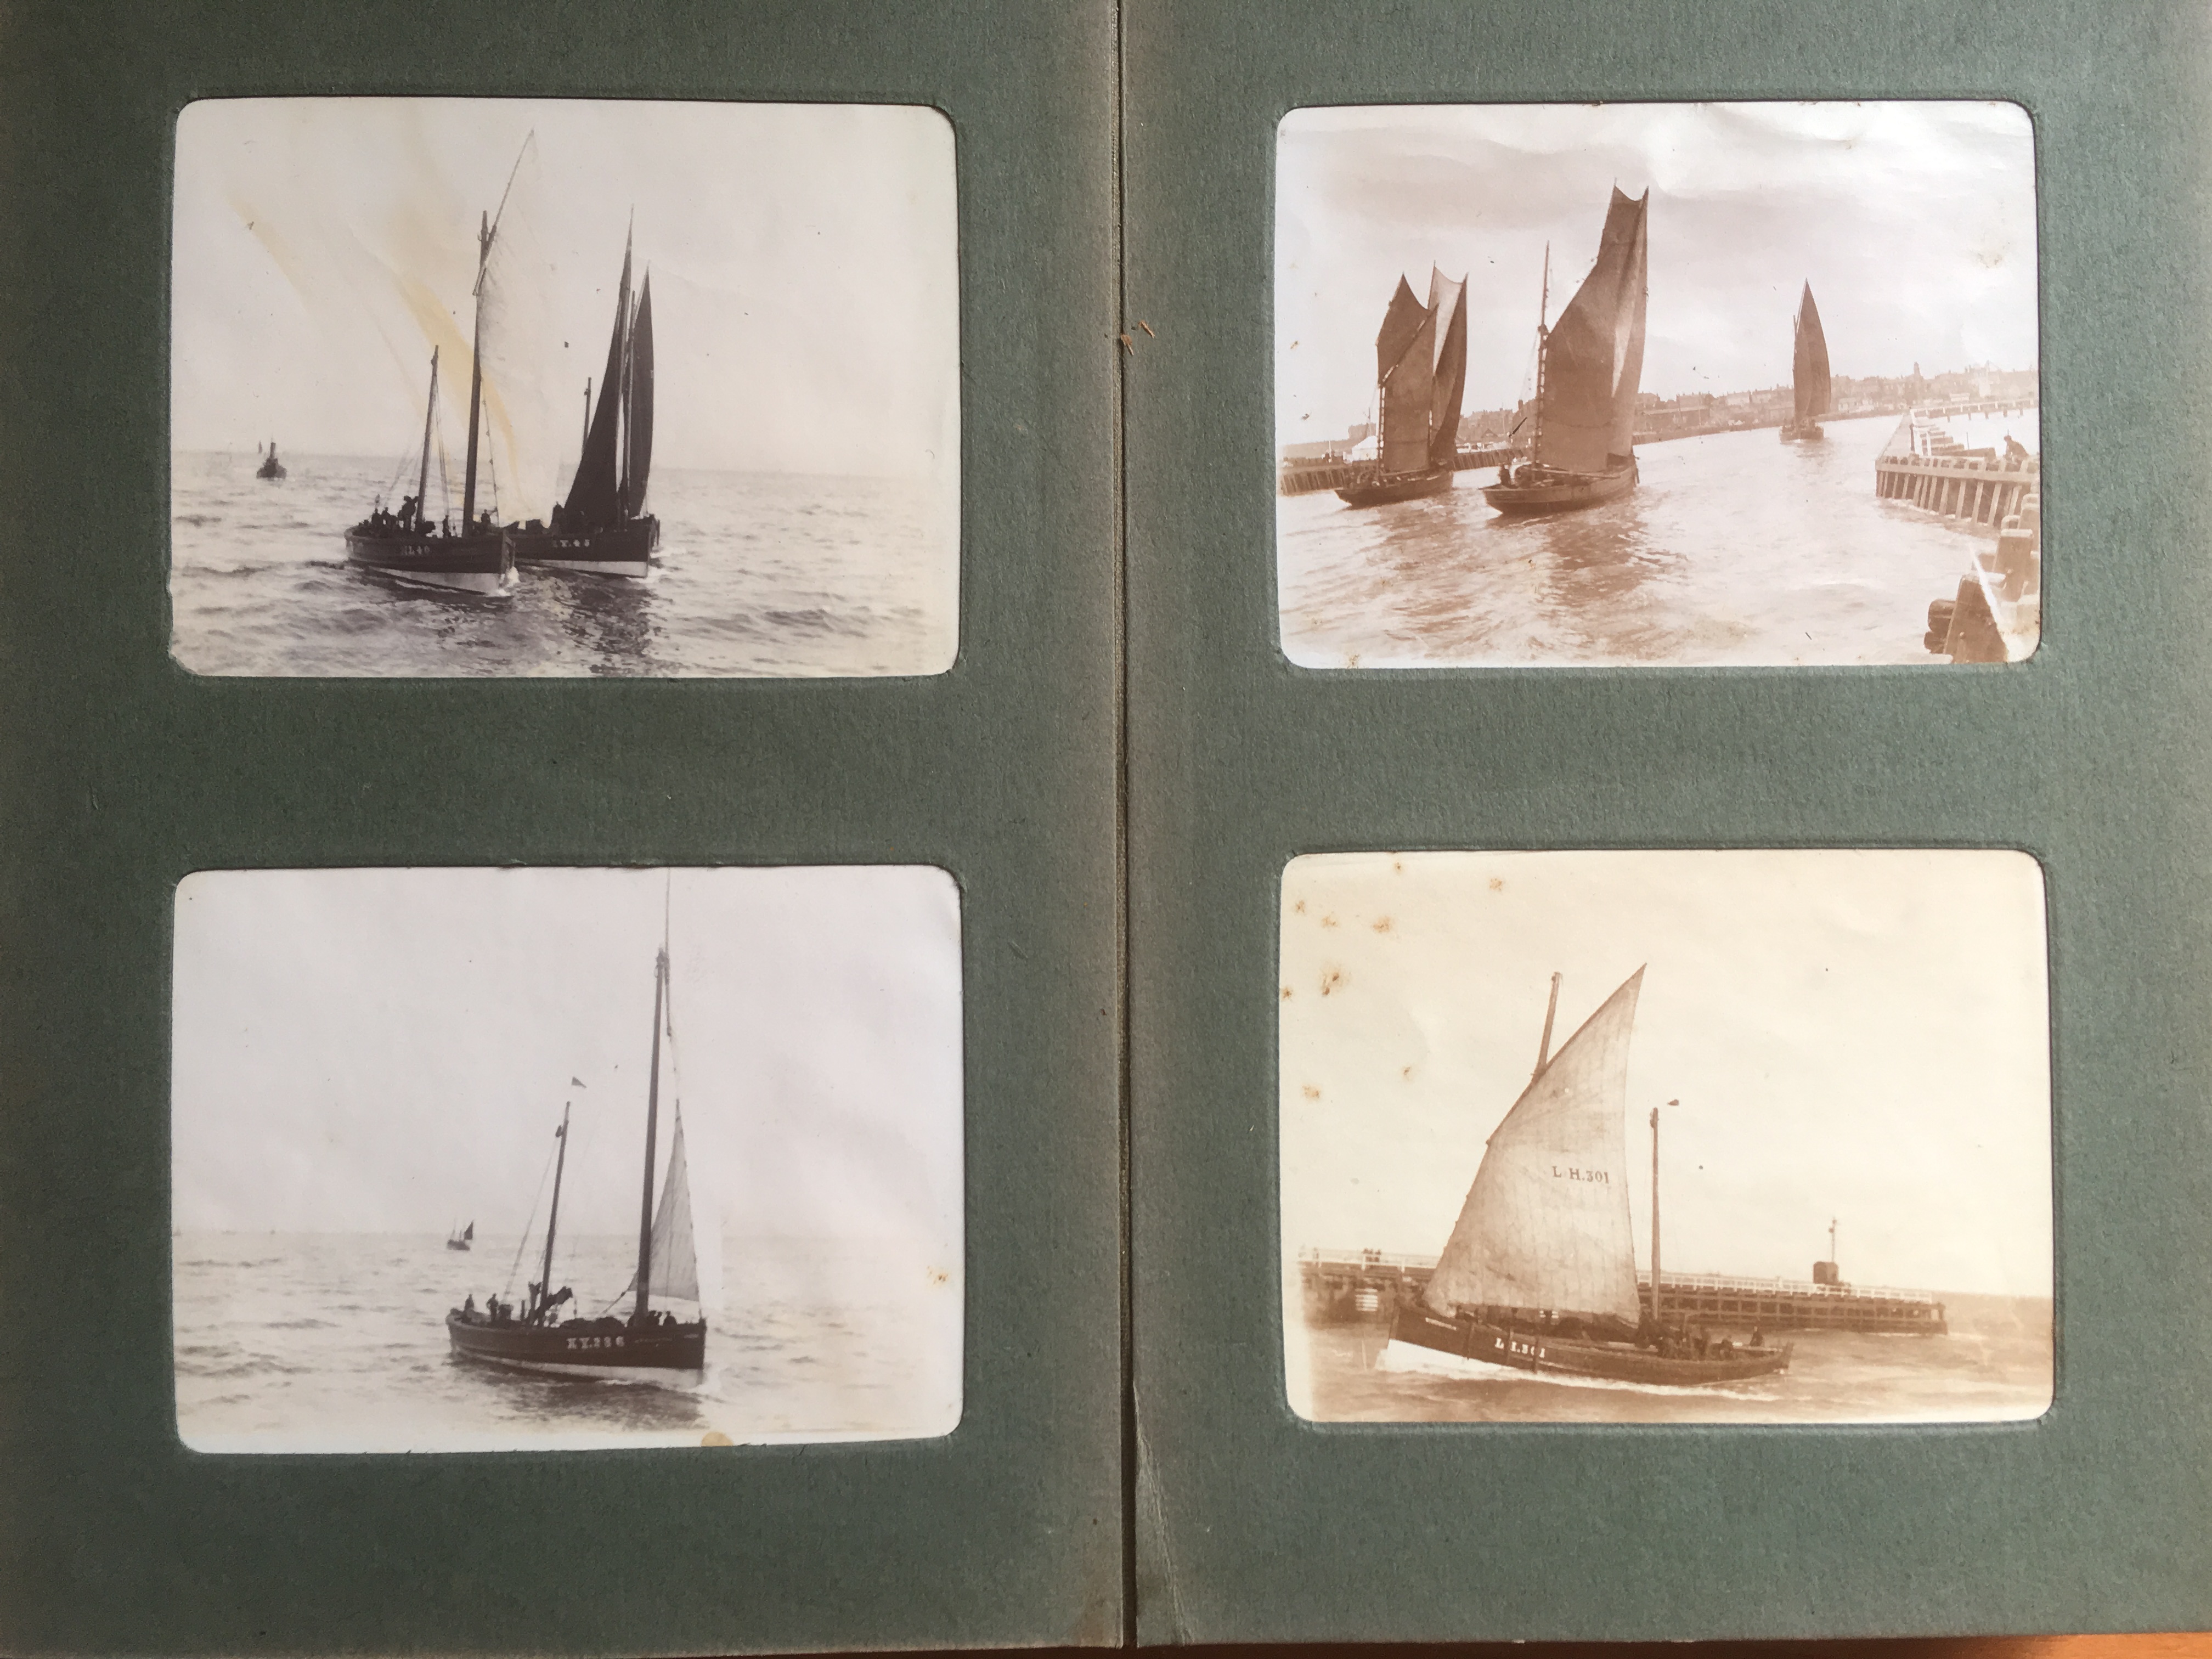 VICTORIAN PHOTOGRAPH ALBUM WITH MAINLY GREAT YARMOUTH AREA IMAGES TOGETHER WITH A SMALL ALBUM OF - Image 7 of 11